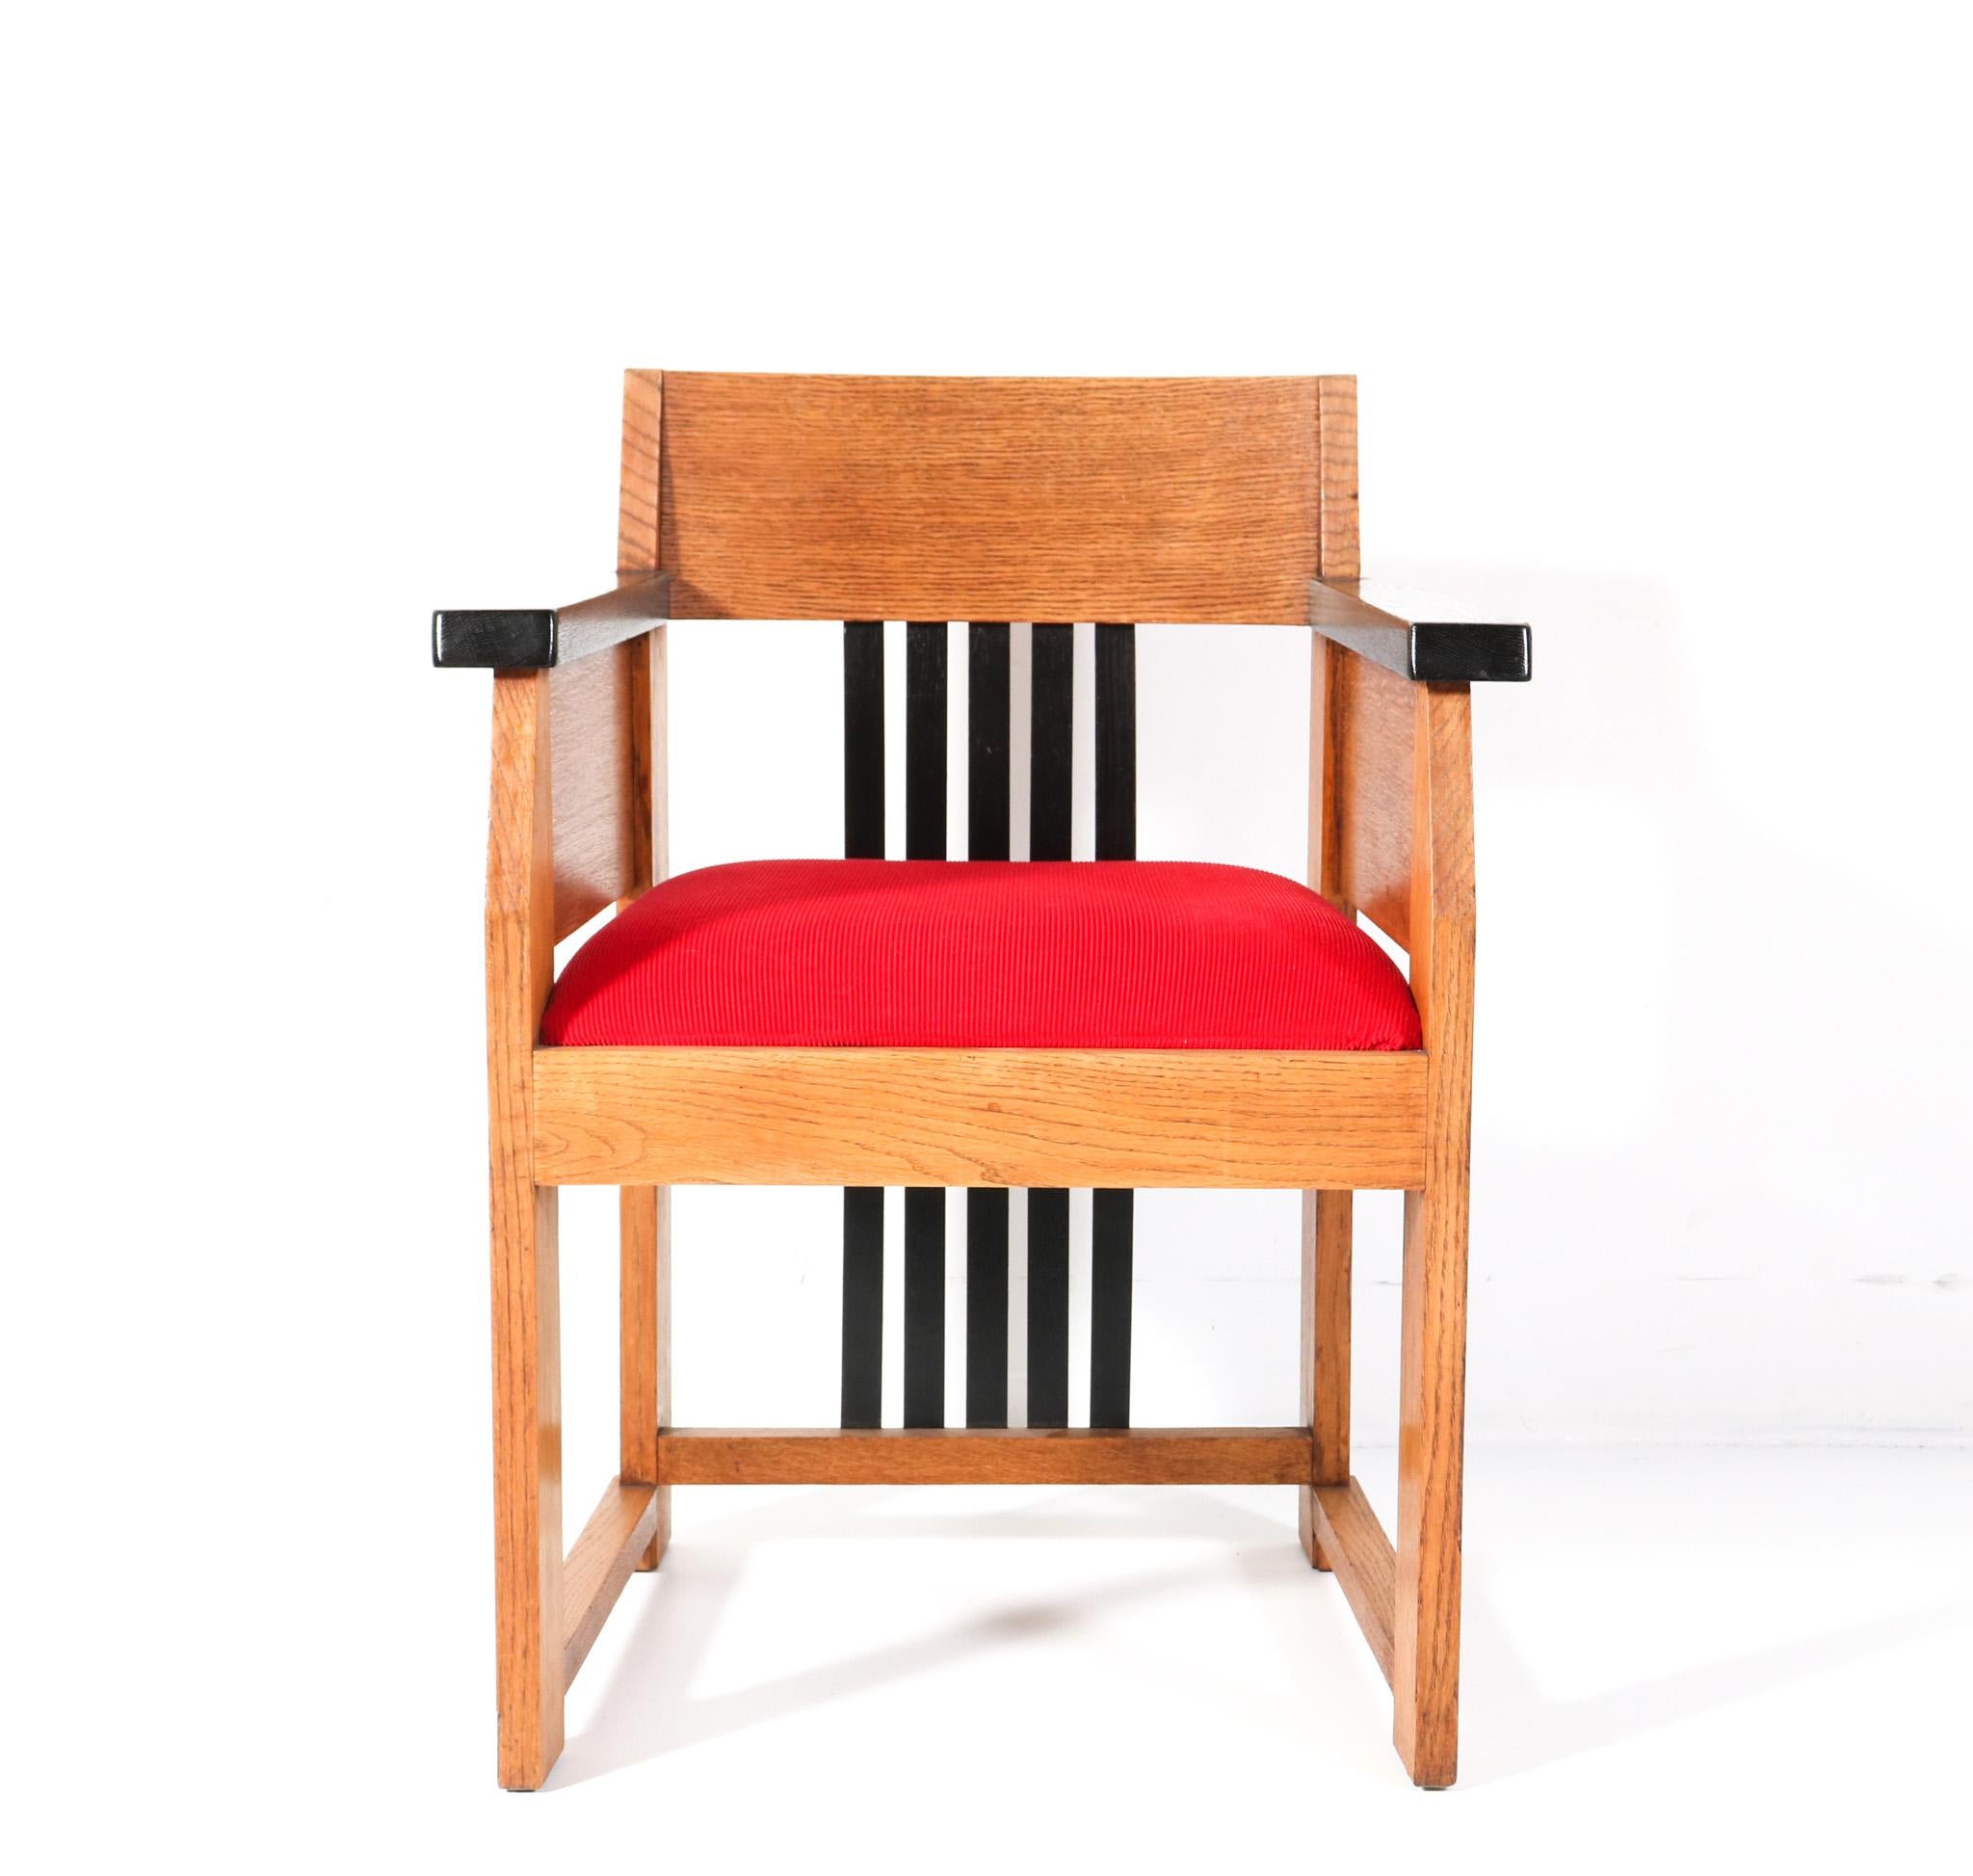 Magnificent and ultra rare Art Deco Modernist armchair.
Design by Hendrik Wouda for H. Pander & Zonen Den Haag.
Striking Dutch design from the 1920s.
Solid oak base with original black lacquered backrest and elements.
The seat has been